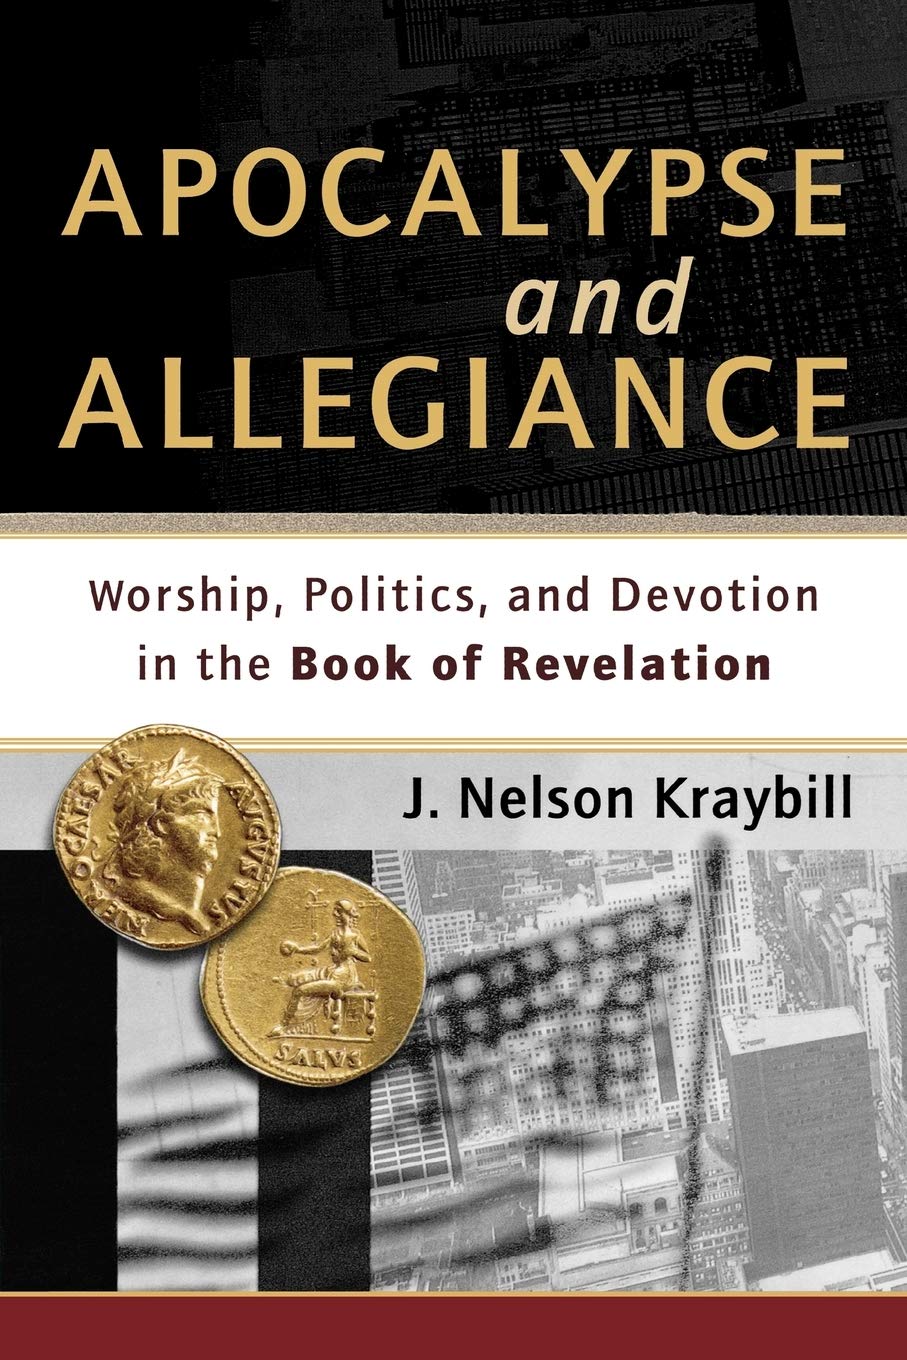 Apocalypse and Allegiance: Worship, Politics, and Devotion in the Book of Revelation